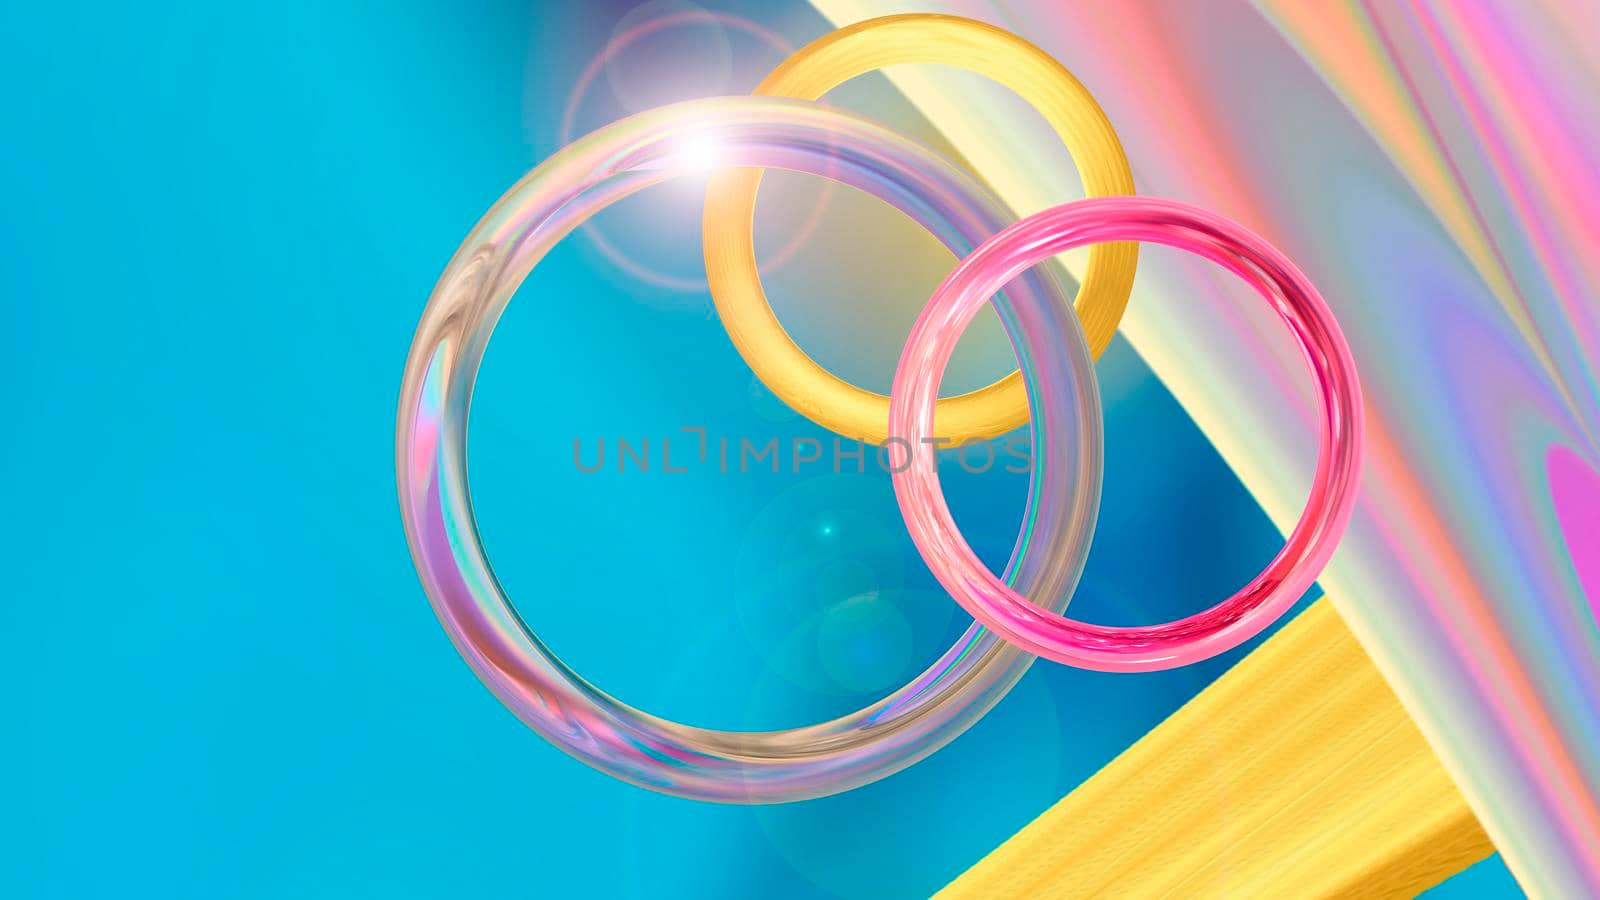 Abstract multicolored background with shapes and rainbow highlights.